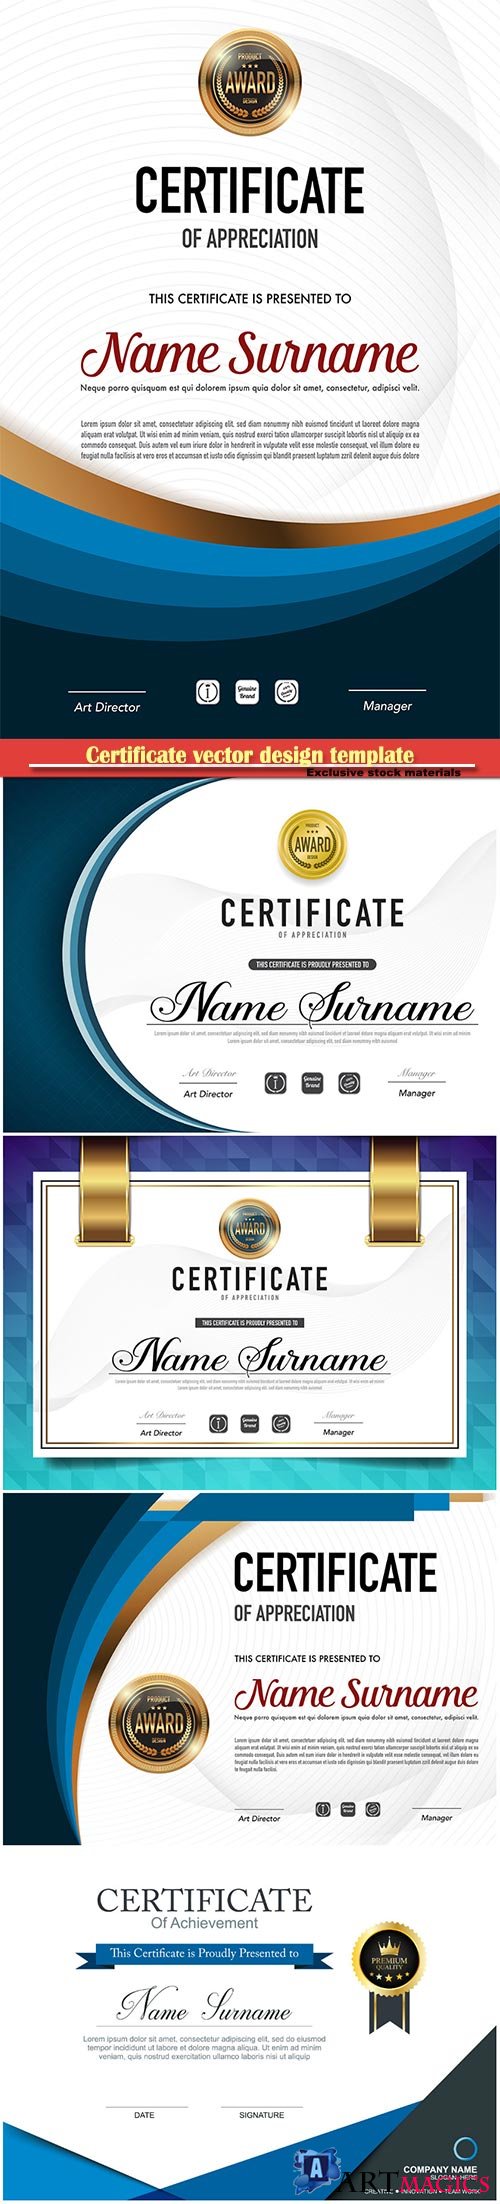 Certificate and vector diploma design template # 73